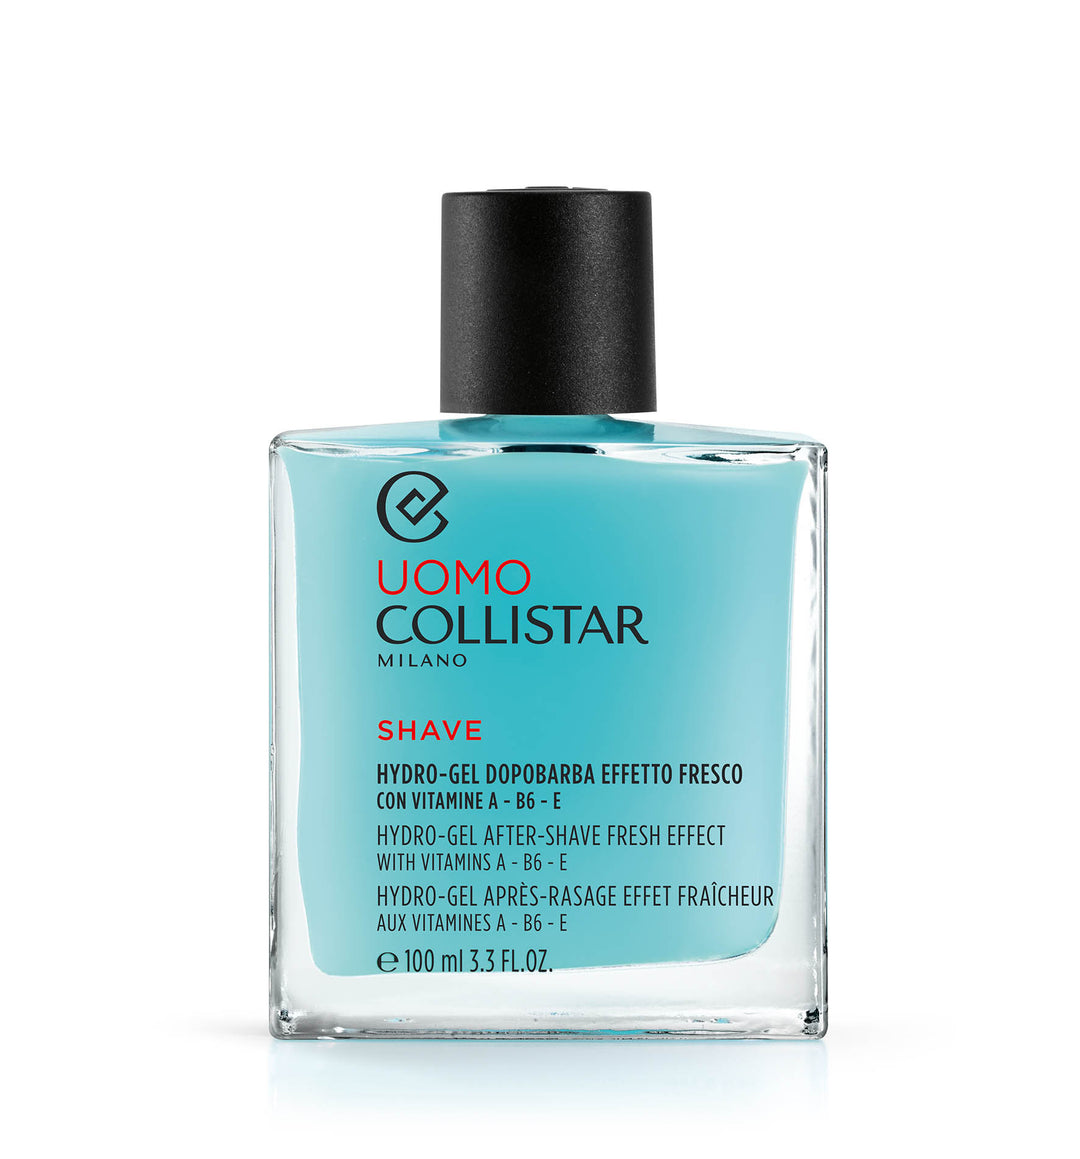 

Collistar Fresh Effect After Shave Hydro Gel with Vitamin A - B6 - E 100 ml.